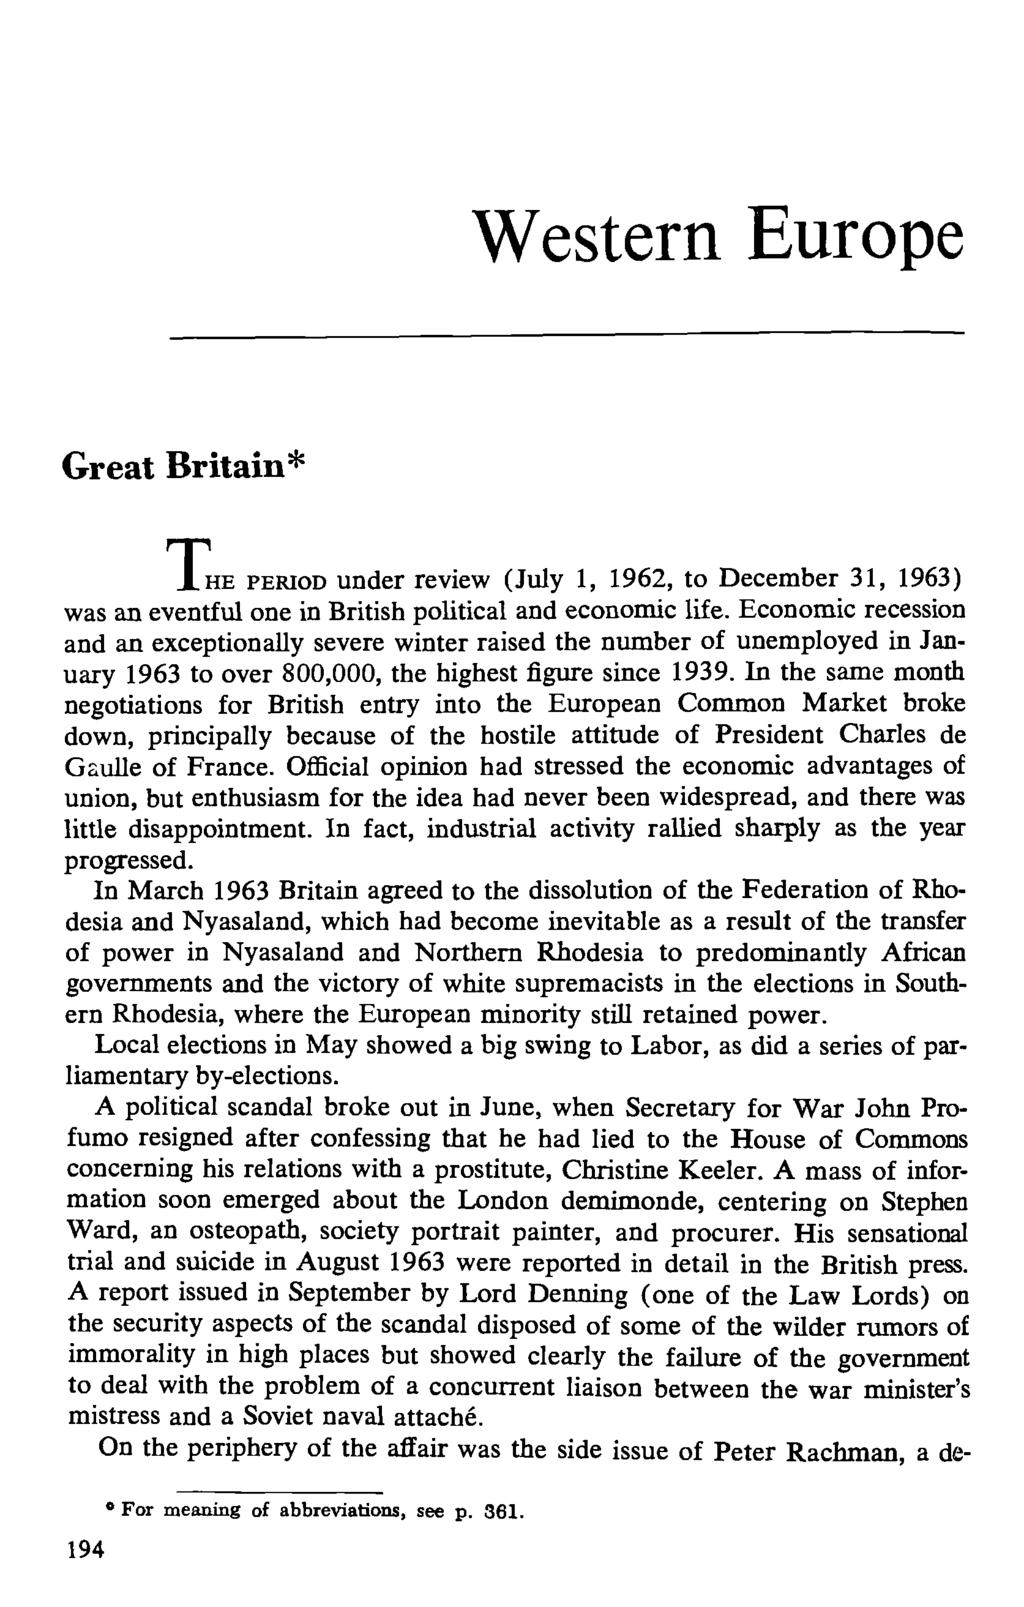 Western Europe Great Britain* JLHE PERIOD under review (July 1, 1962, to December 31, 1963) was an eventful one in British political and economic life.